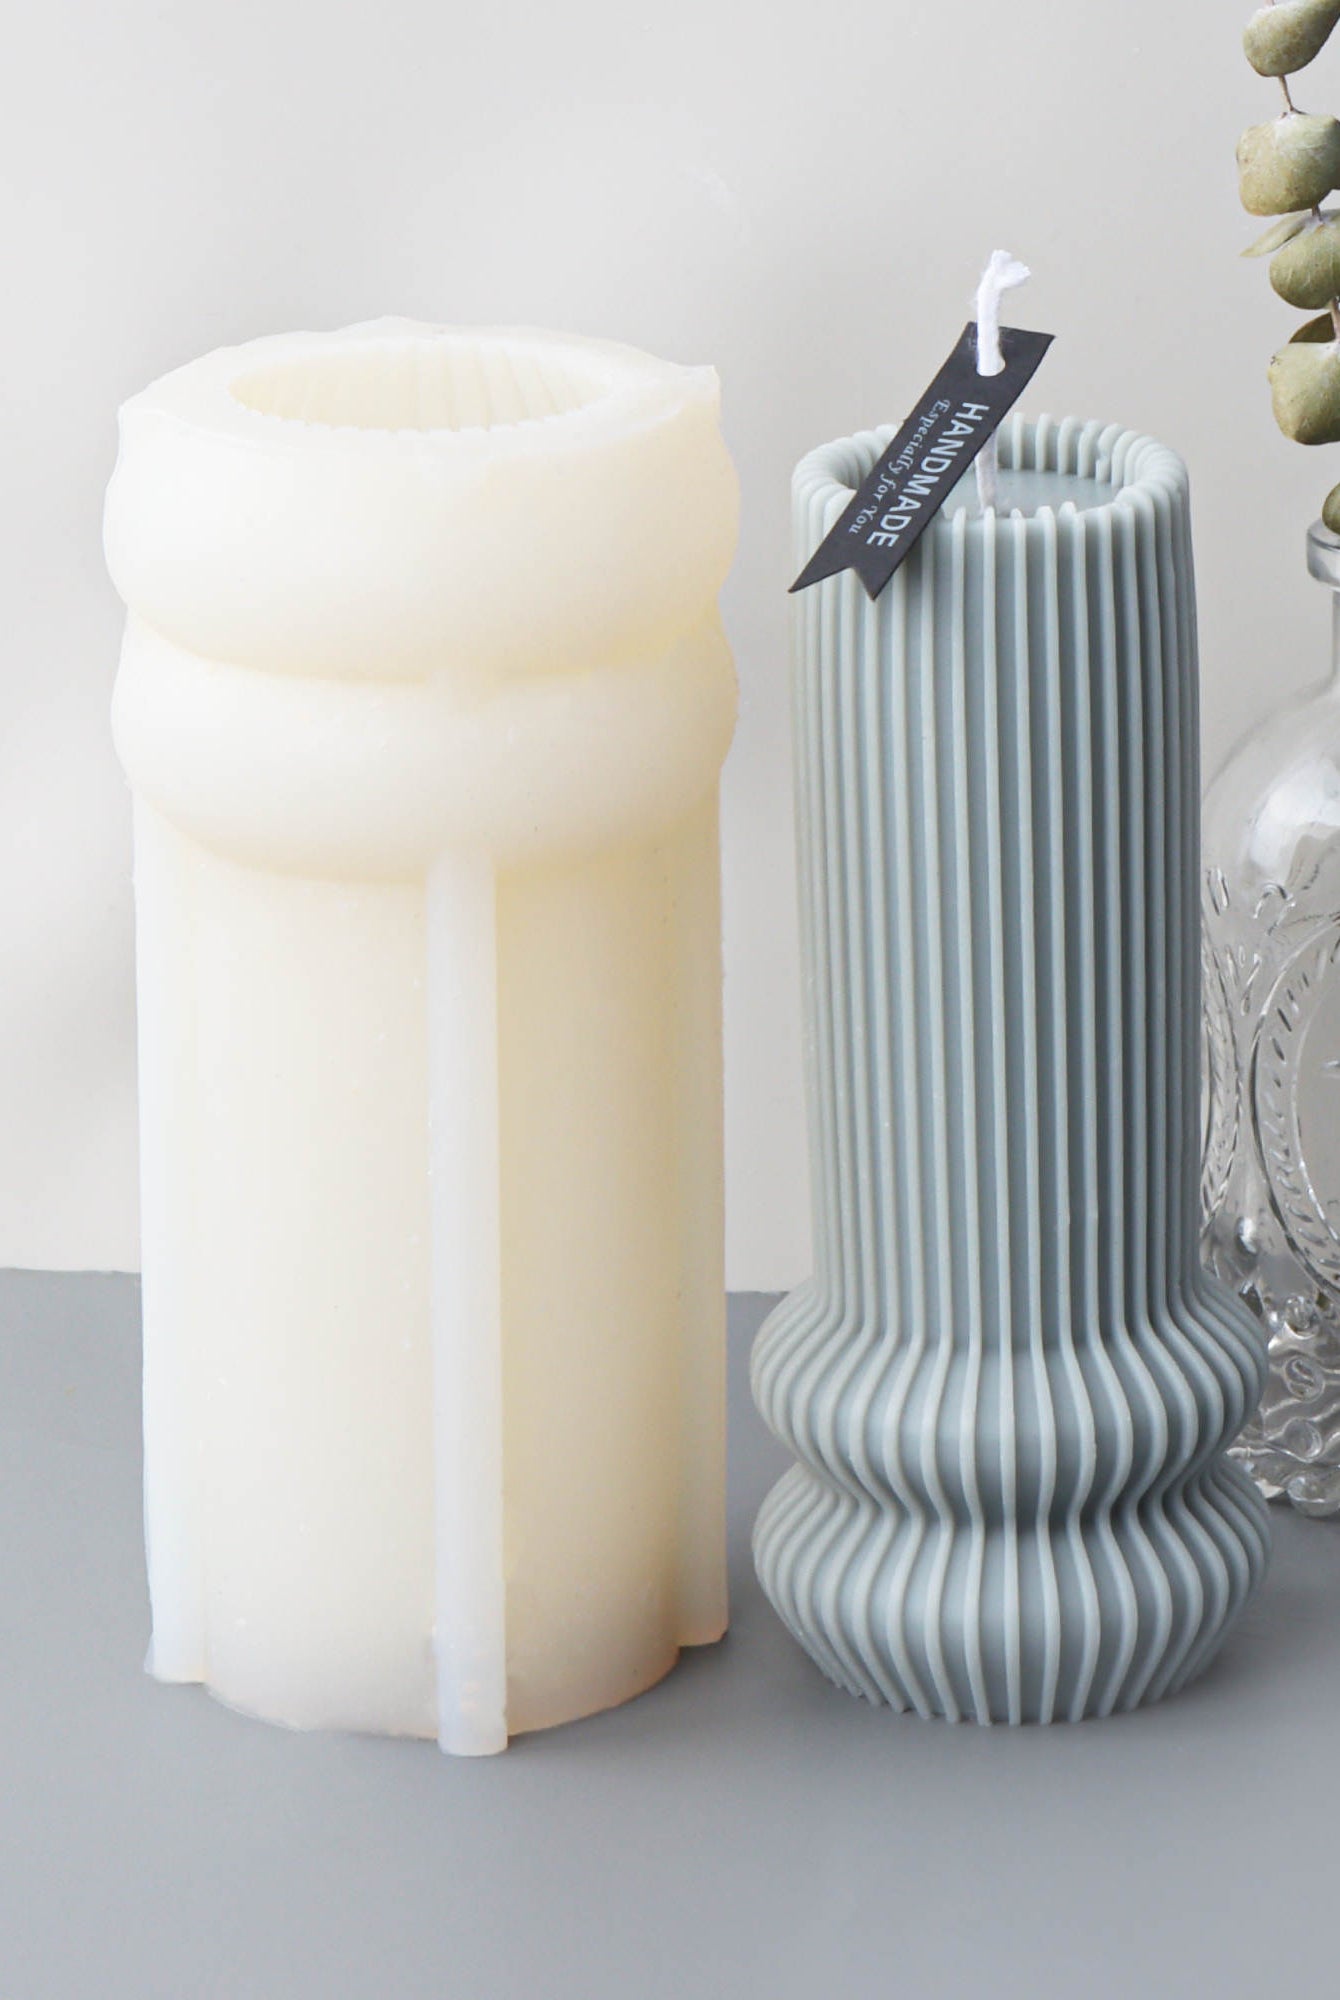 Nordic Vase Candle Moulds 3 - Silicone Mould, Mold for DIY Candles. Created using candle making kit with cotton candle wicks and candle colour chips. Using soy wax for pillar candles. Sold by Myka Candles Moulds Australia